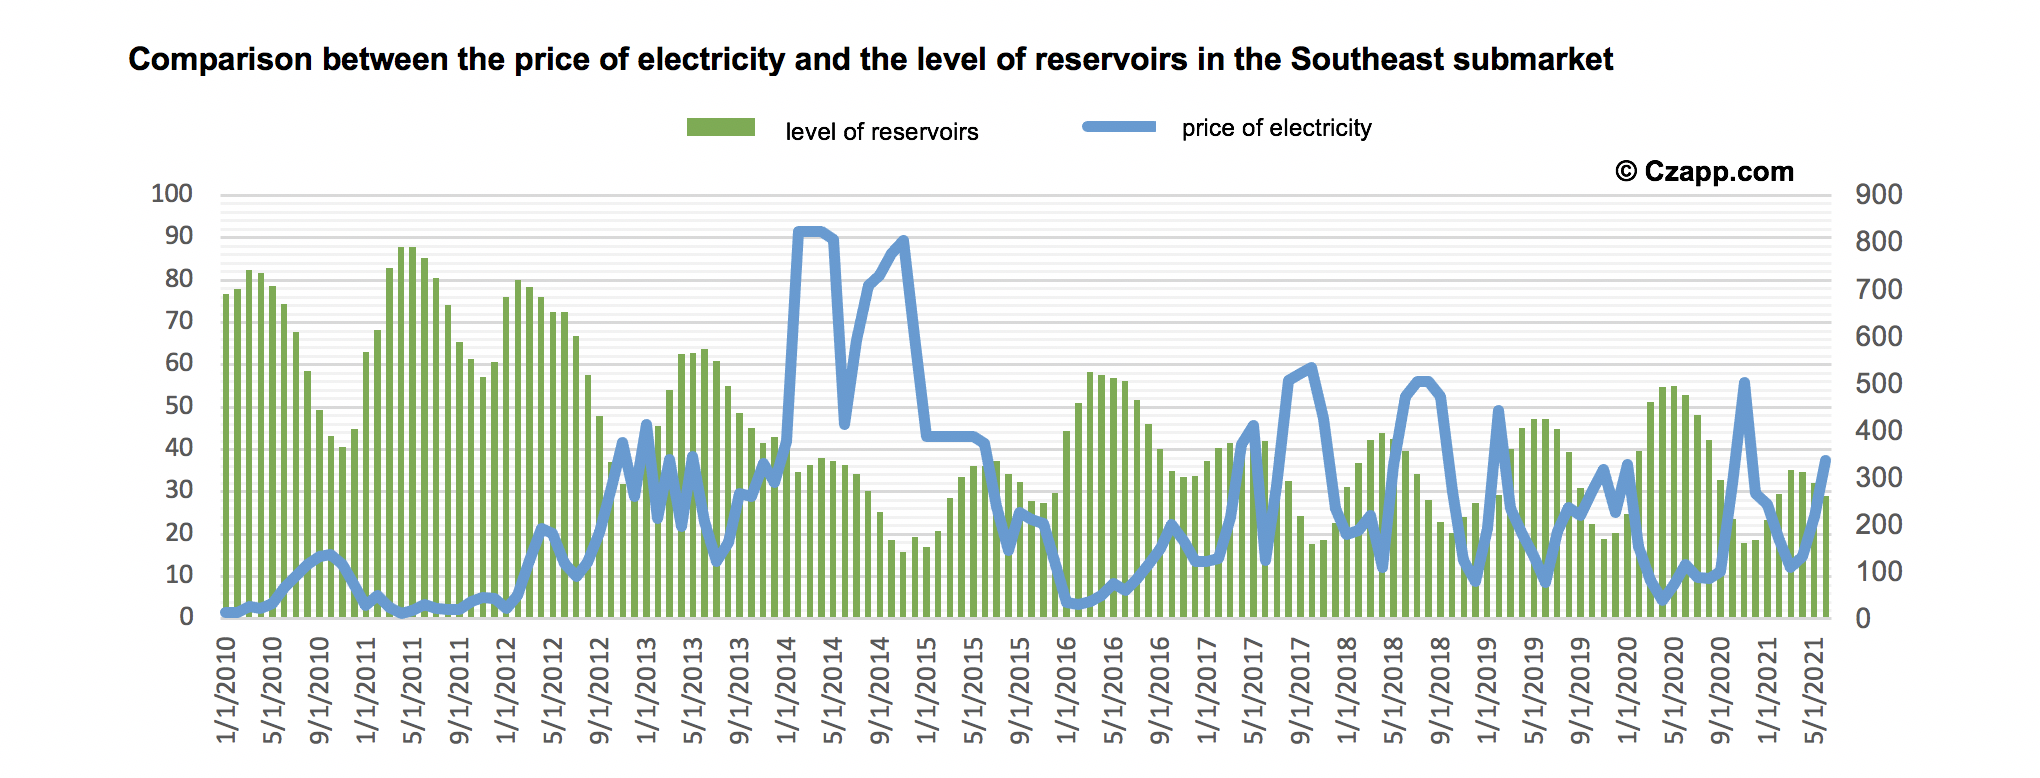 Electricity rates have skyrocketed in Brazil. The govt says the